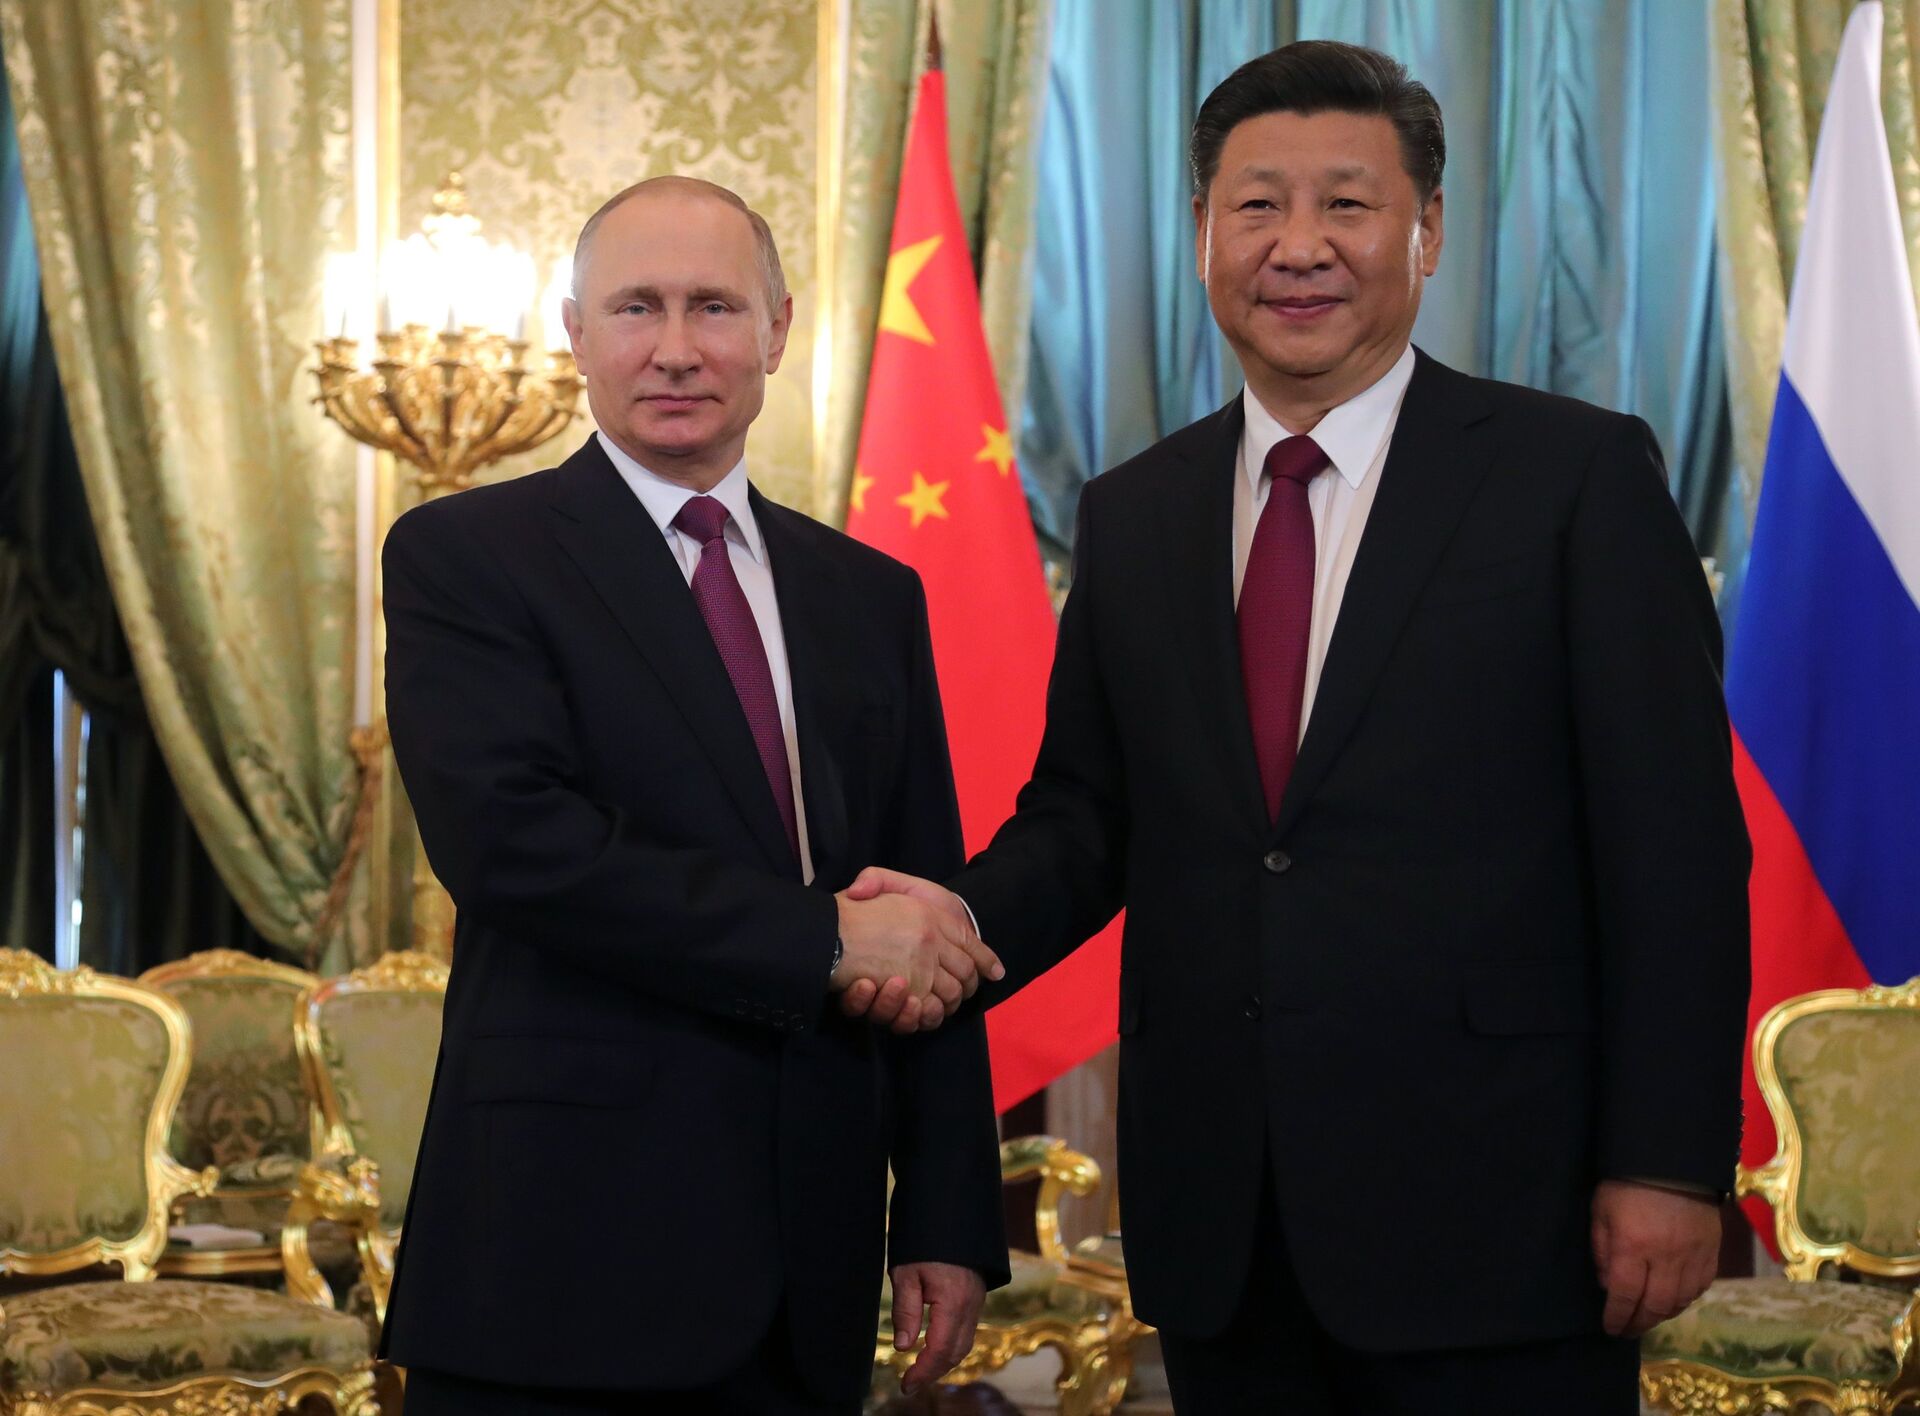 July 4, 2017. From left: Russian President Vladimir Putin meets with People's Republic of China President Xi Jinping in Moscow. - Sputnik International, 1920, 29.03.2022